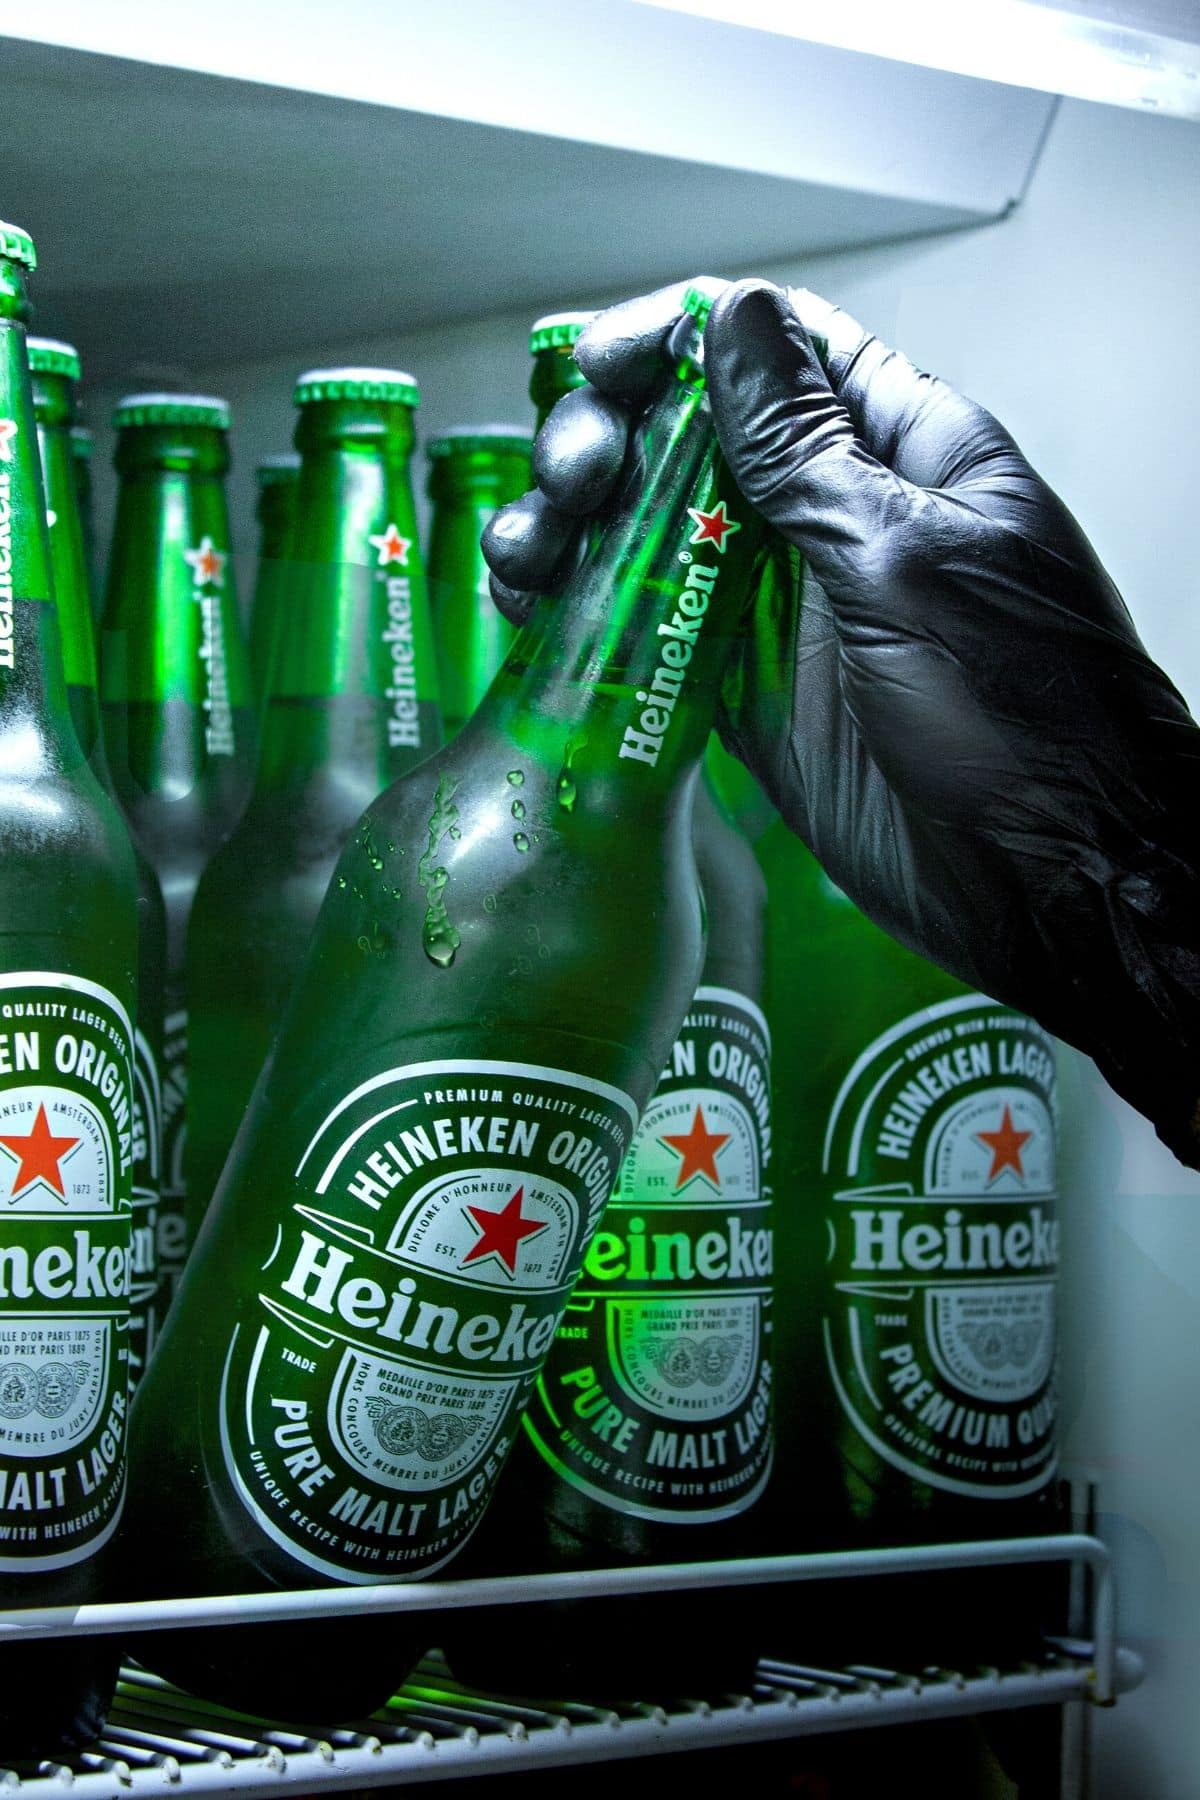 Taking a Heineken beer out of the refrigerator.